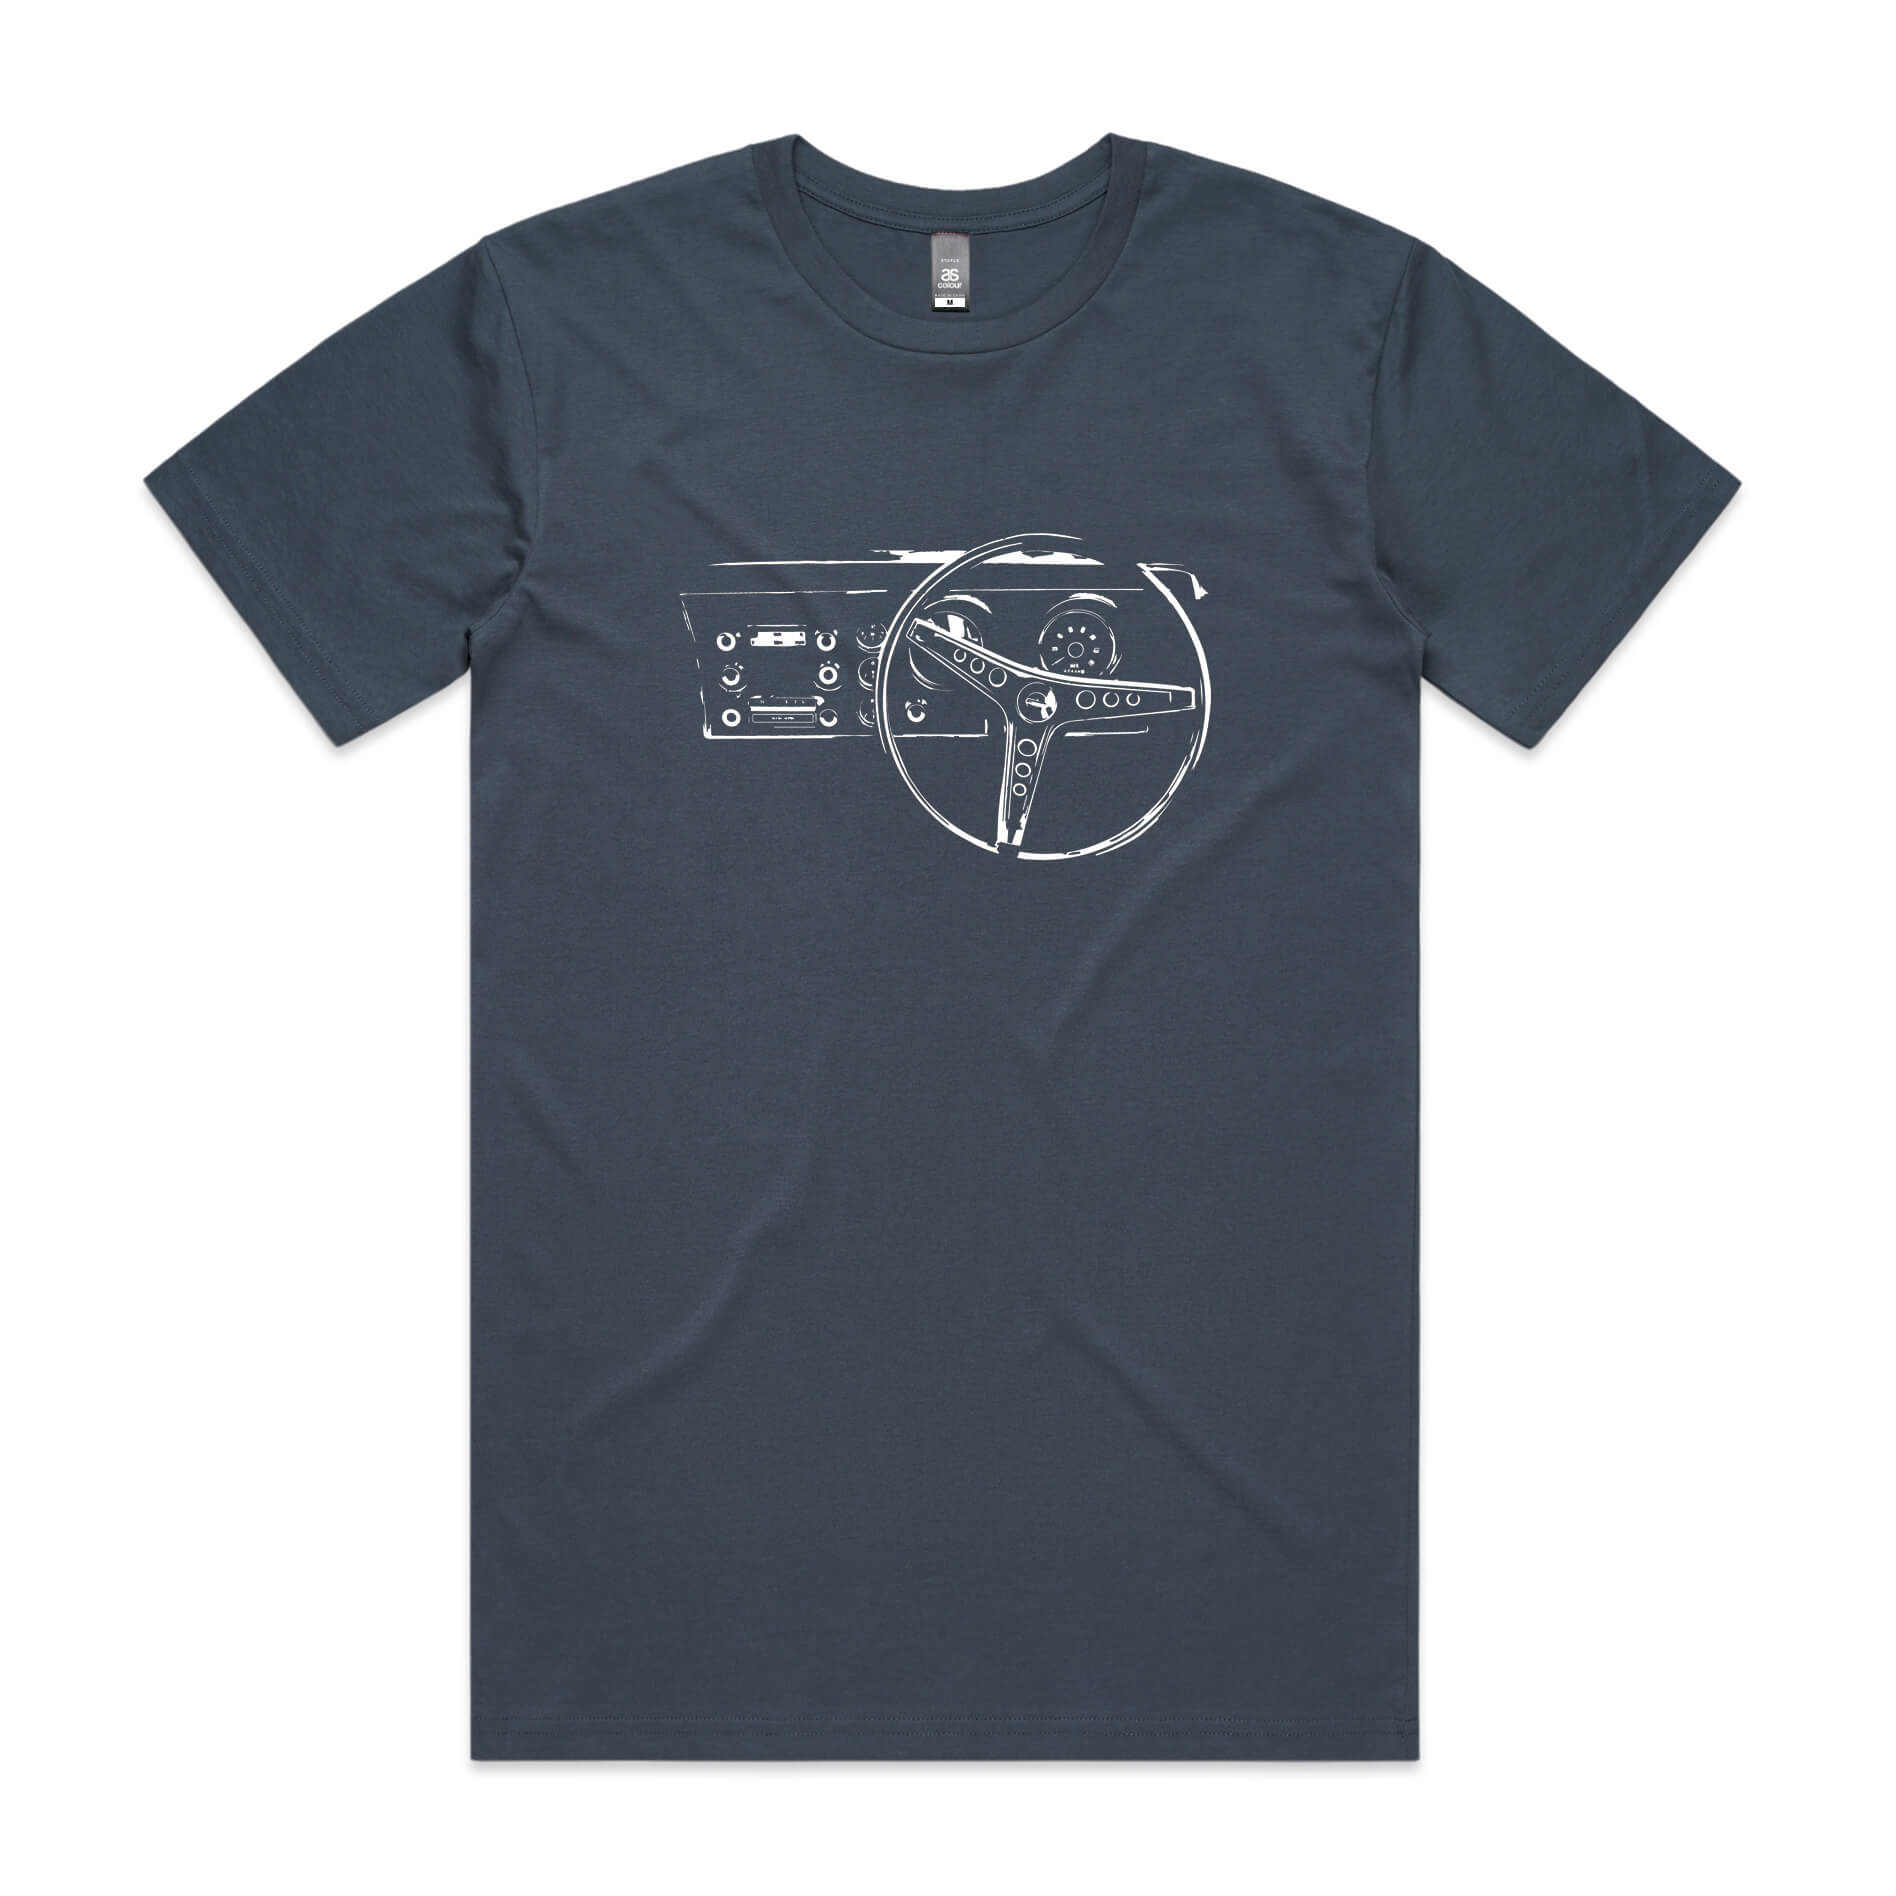 Falcon dash t-shirt in petrol blue with a Ford XY Falcon dashboard printed on the front